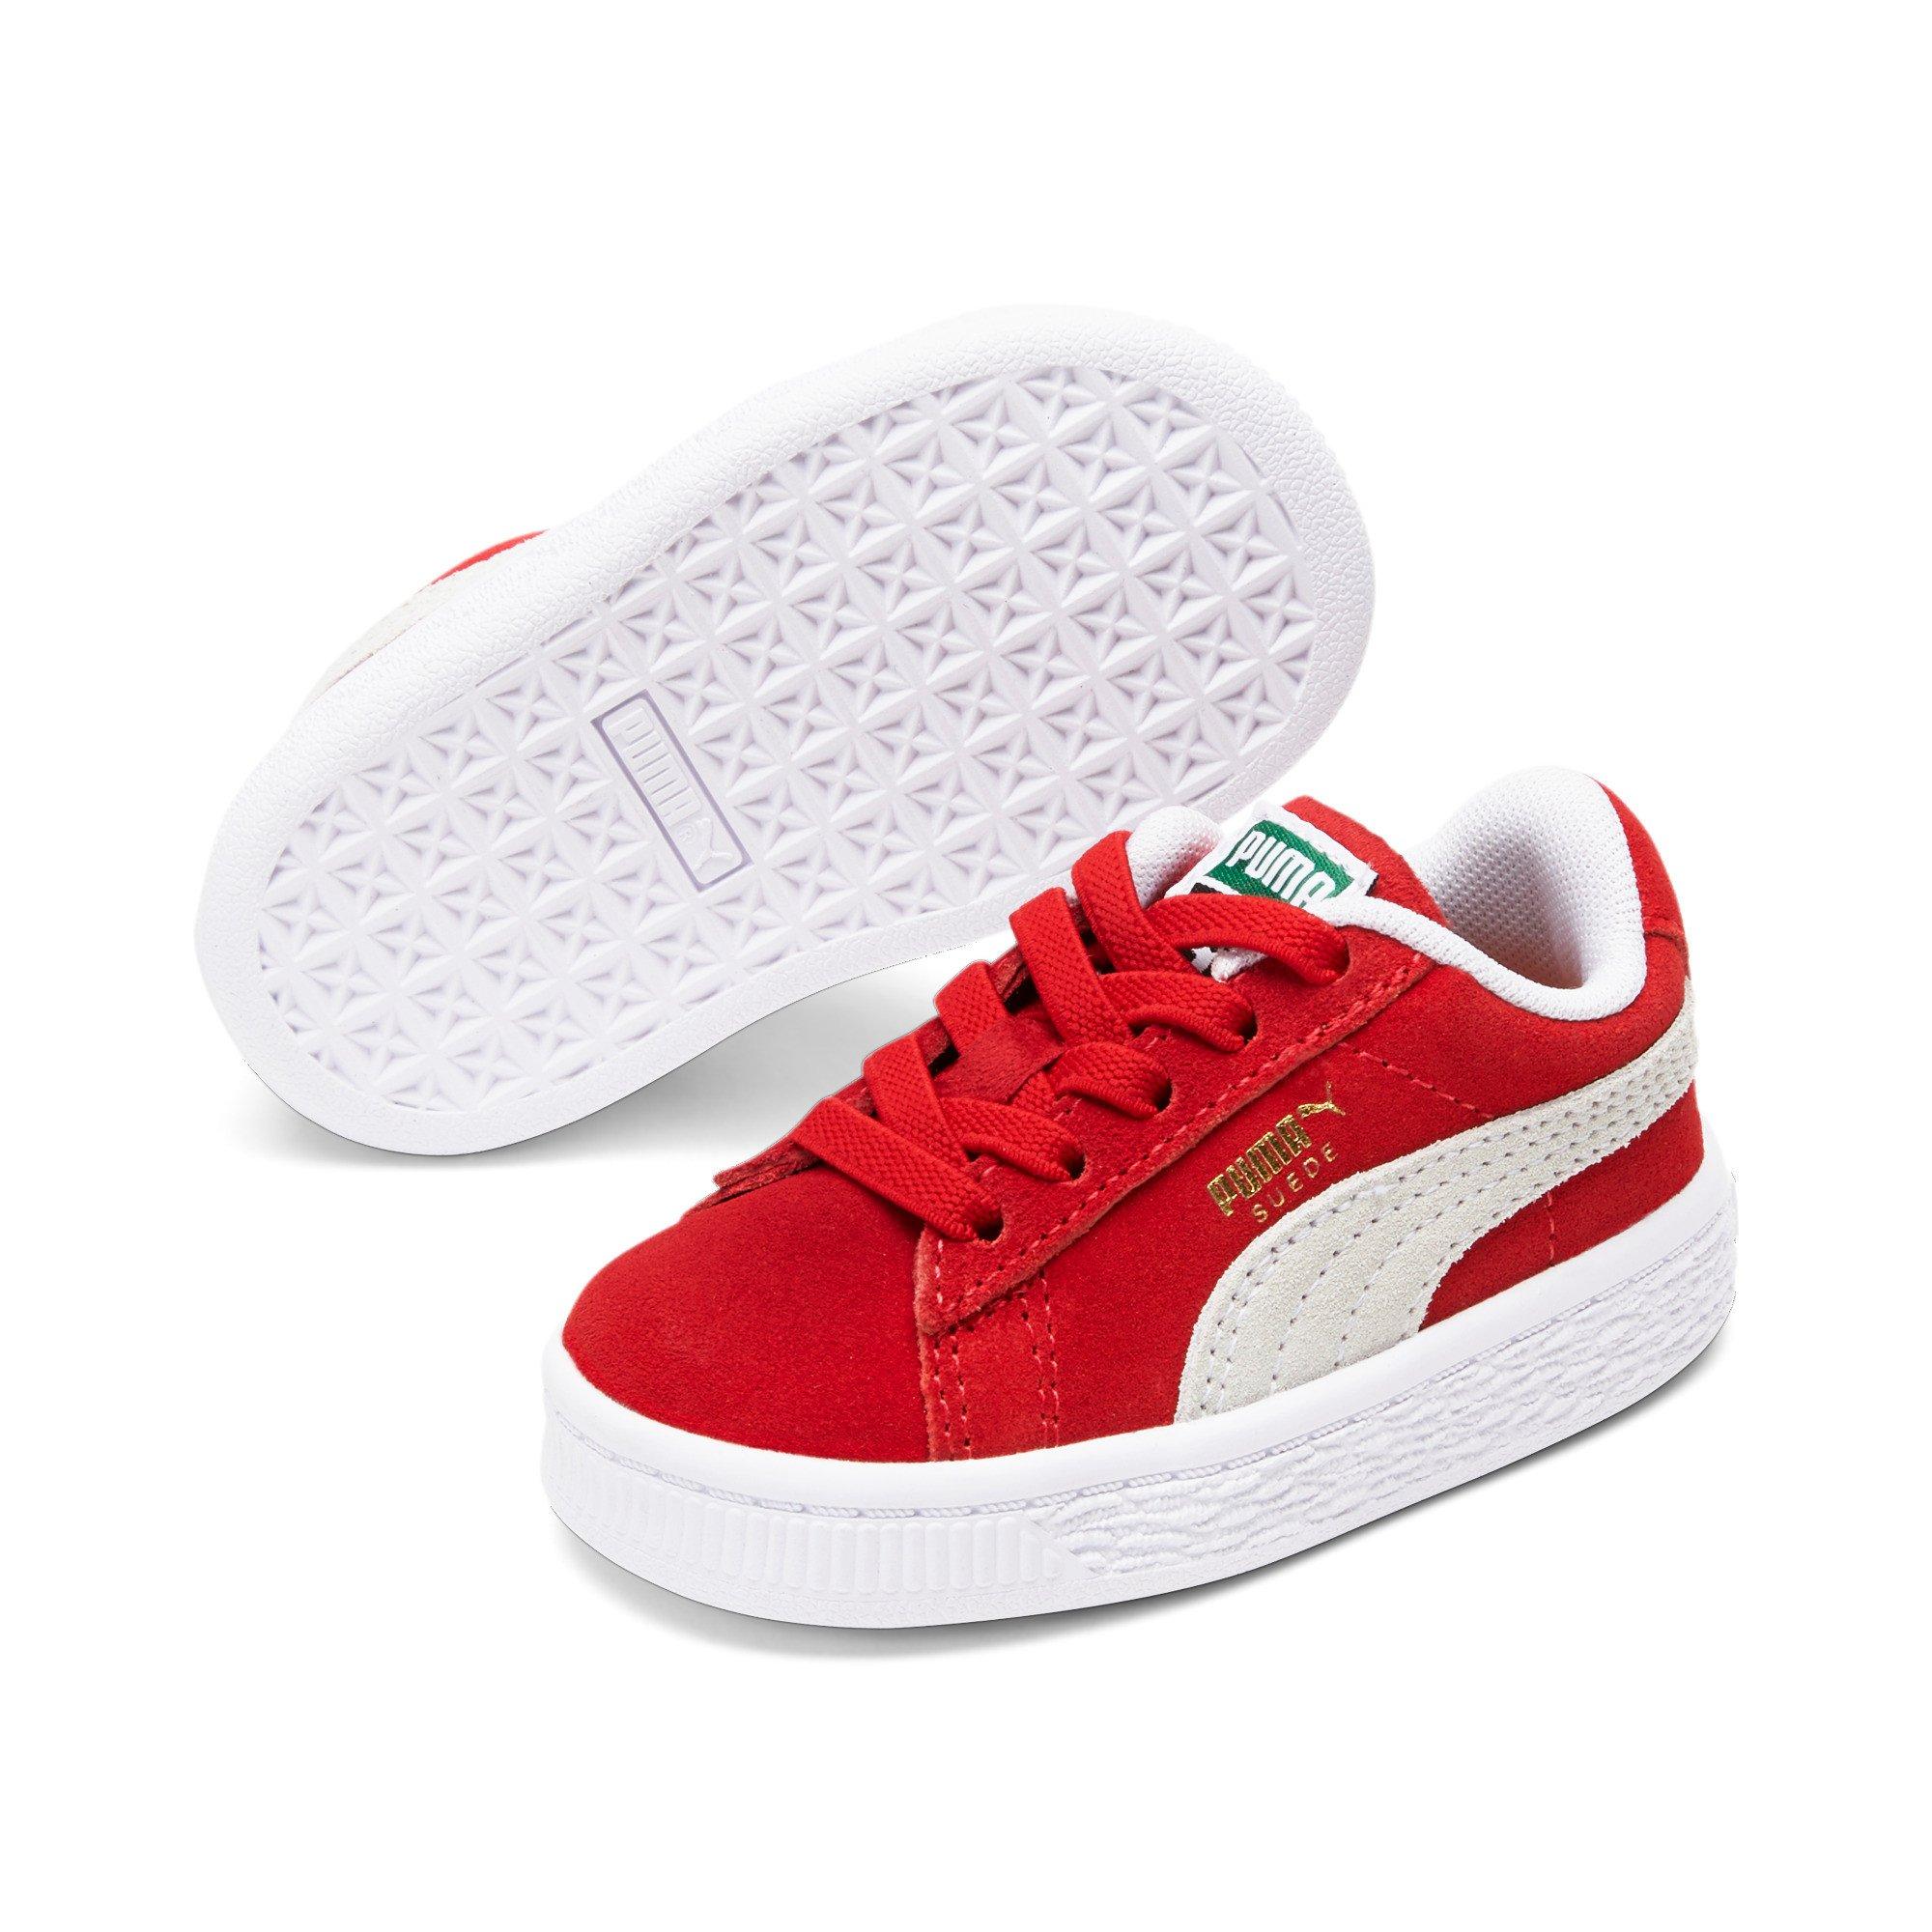 Puma Suede XXI "Red/White" Toddler Boys' - | City Gear